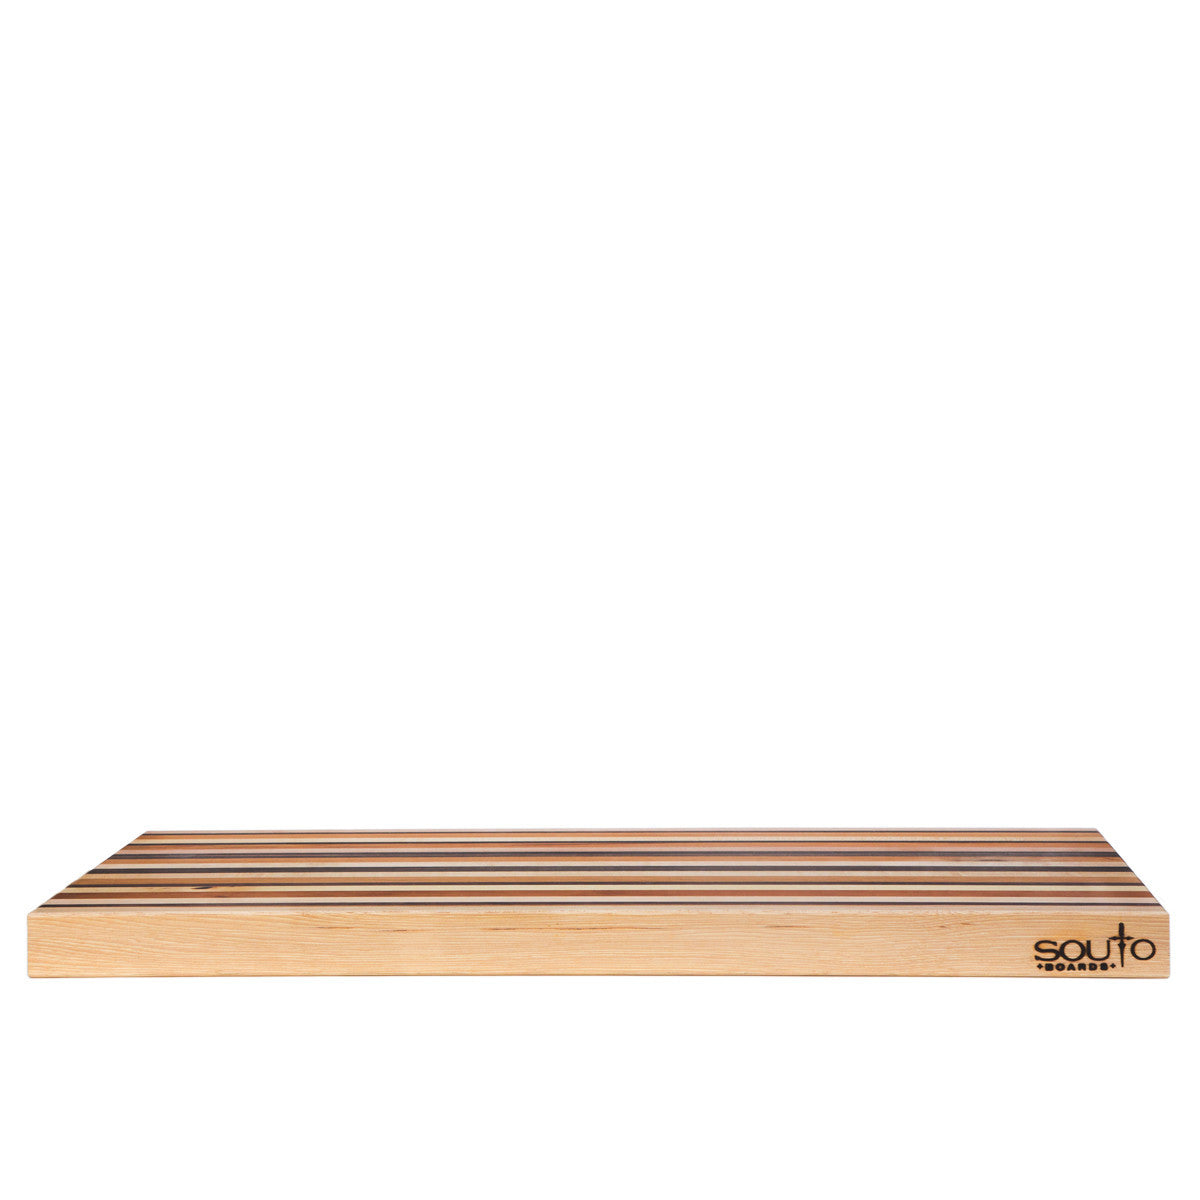 Souto Boards Cutting boards 18" x 30"